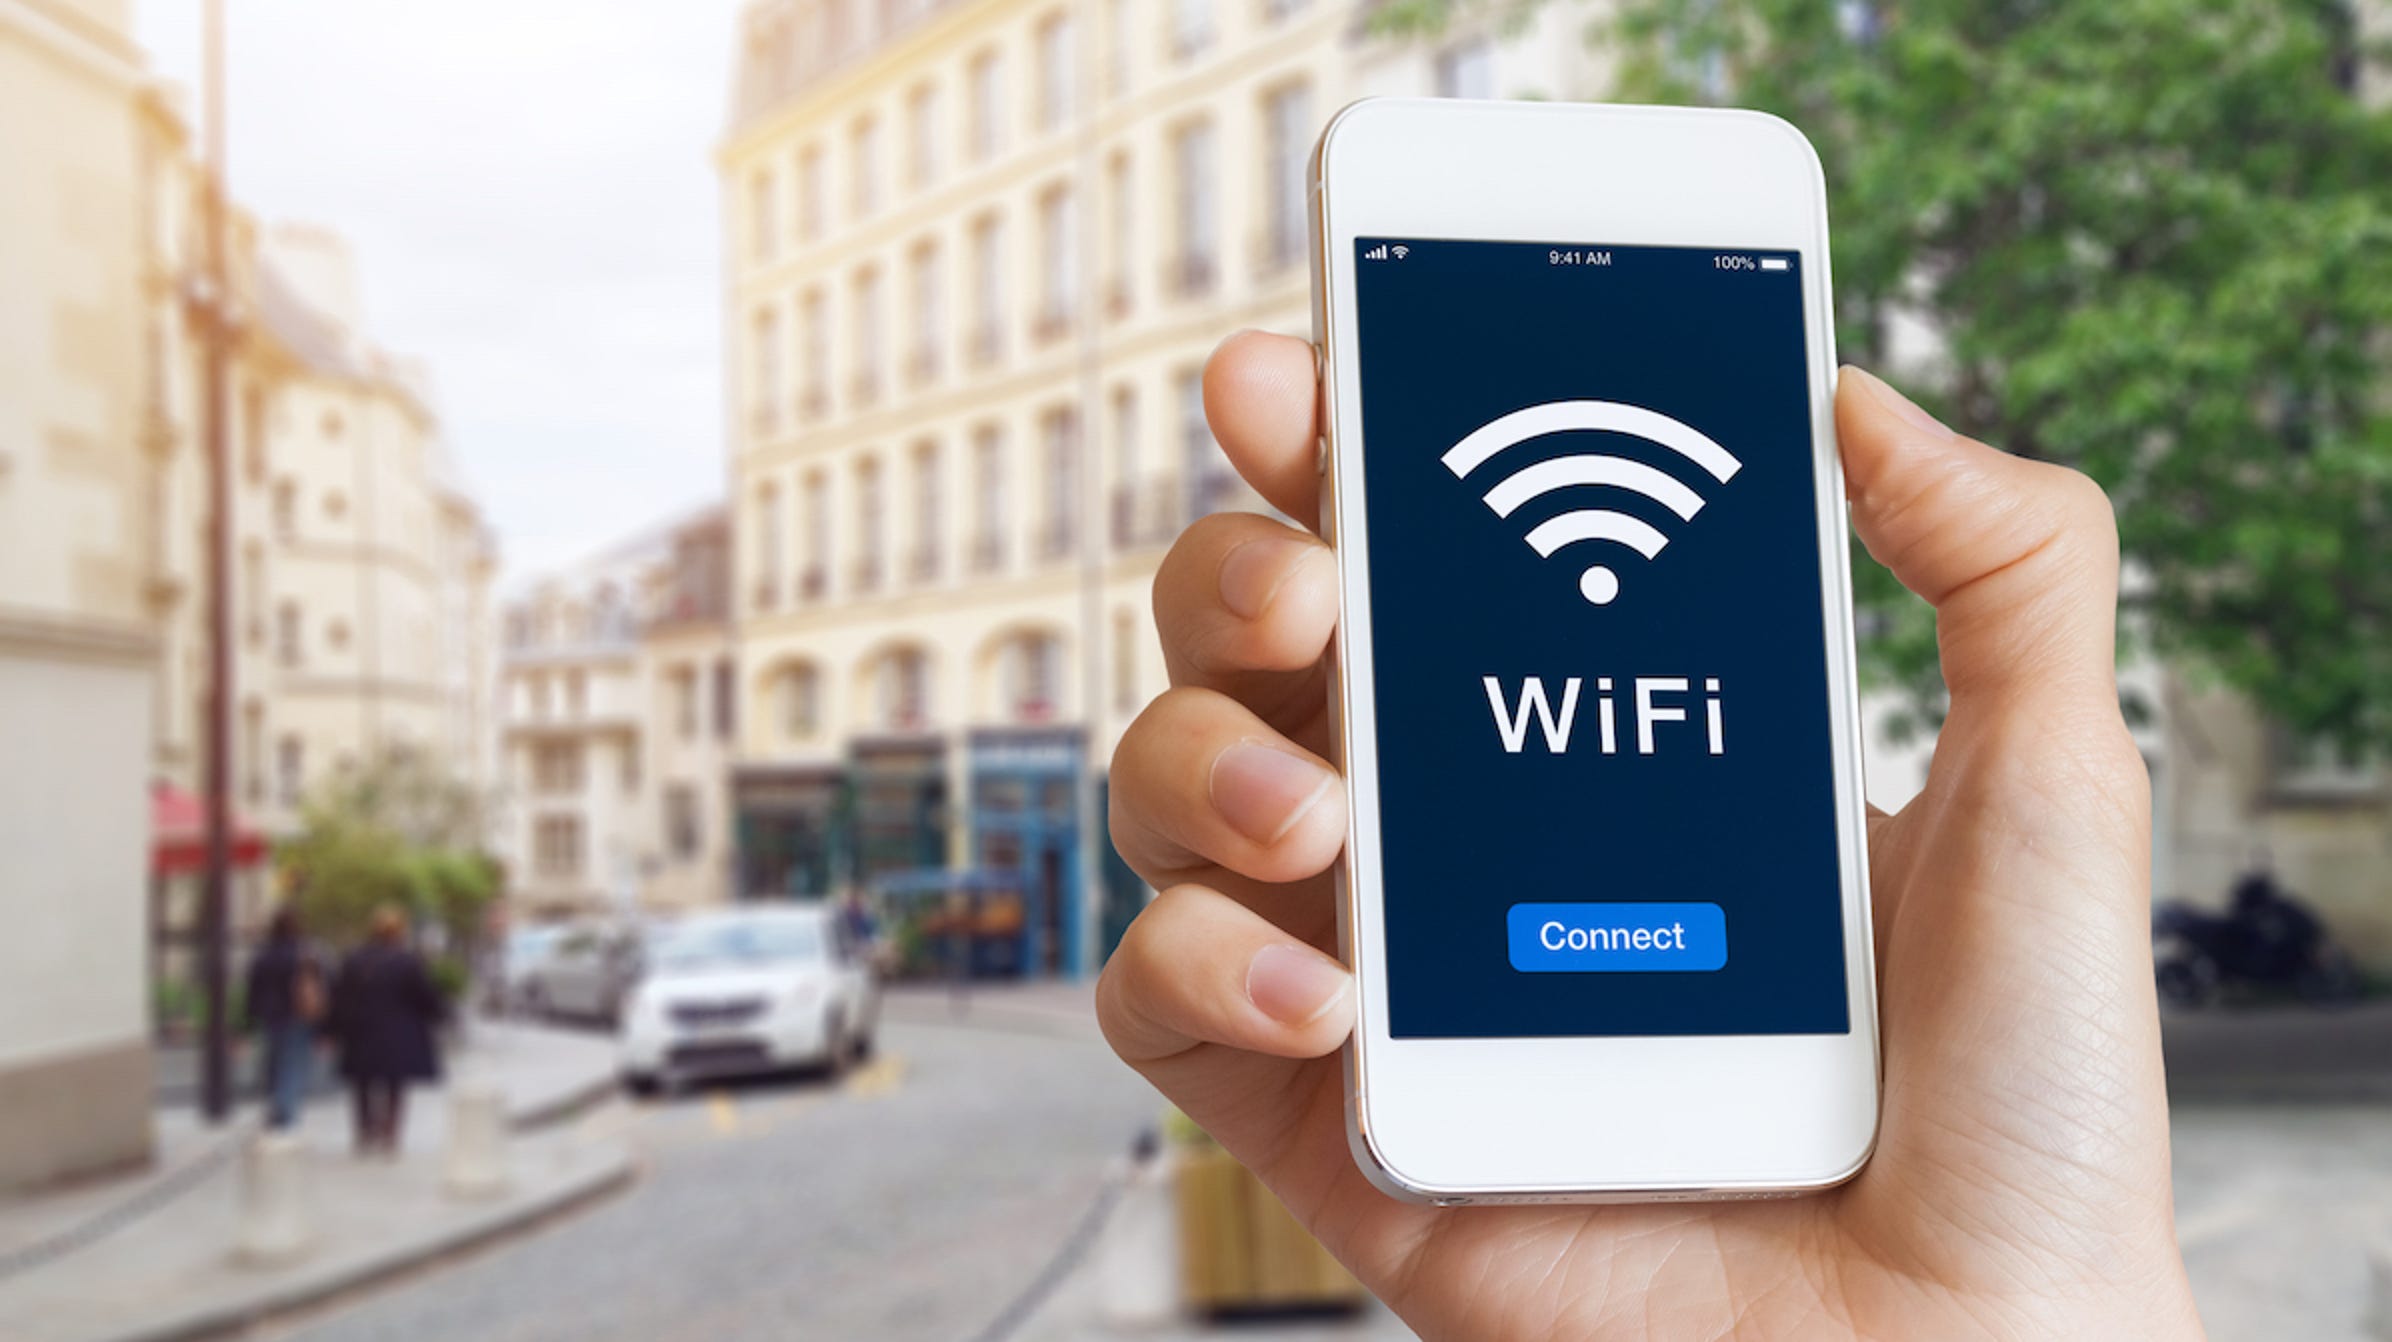 Find Out if Someone is Using Your Wifi